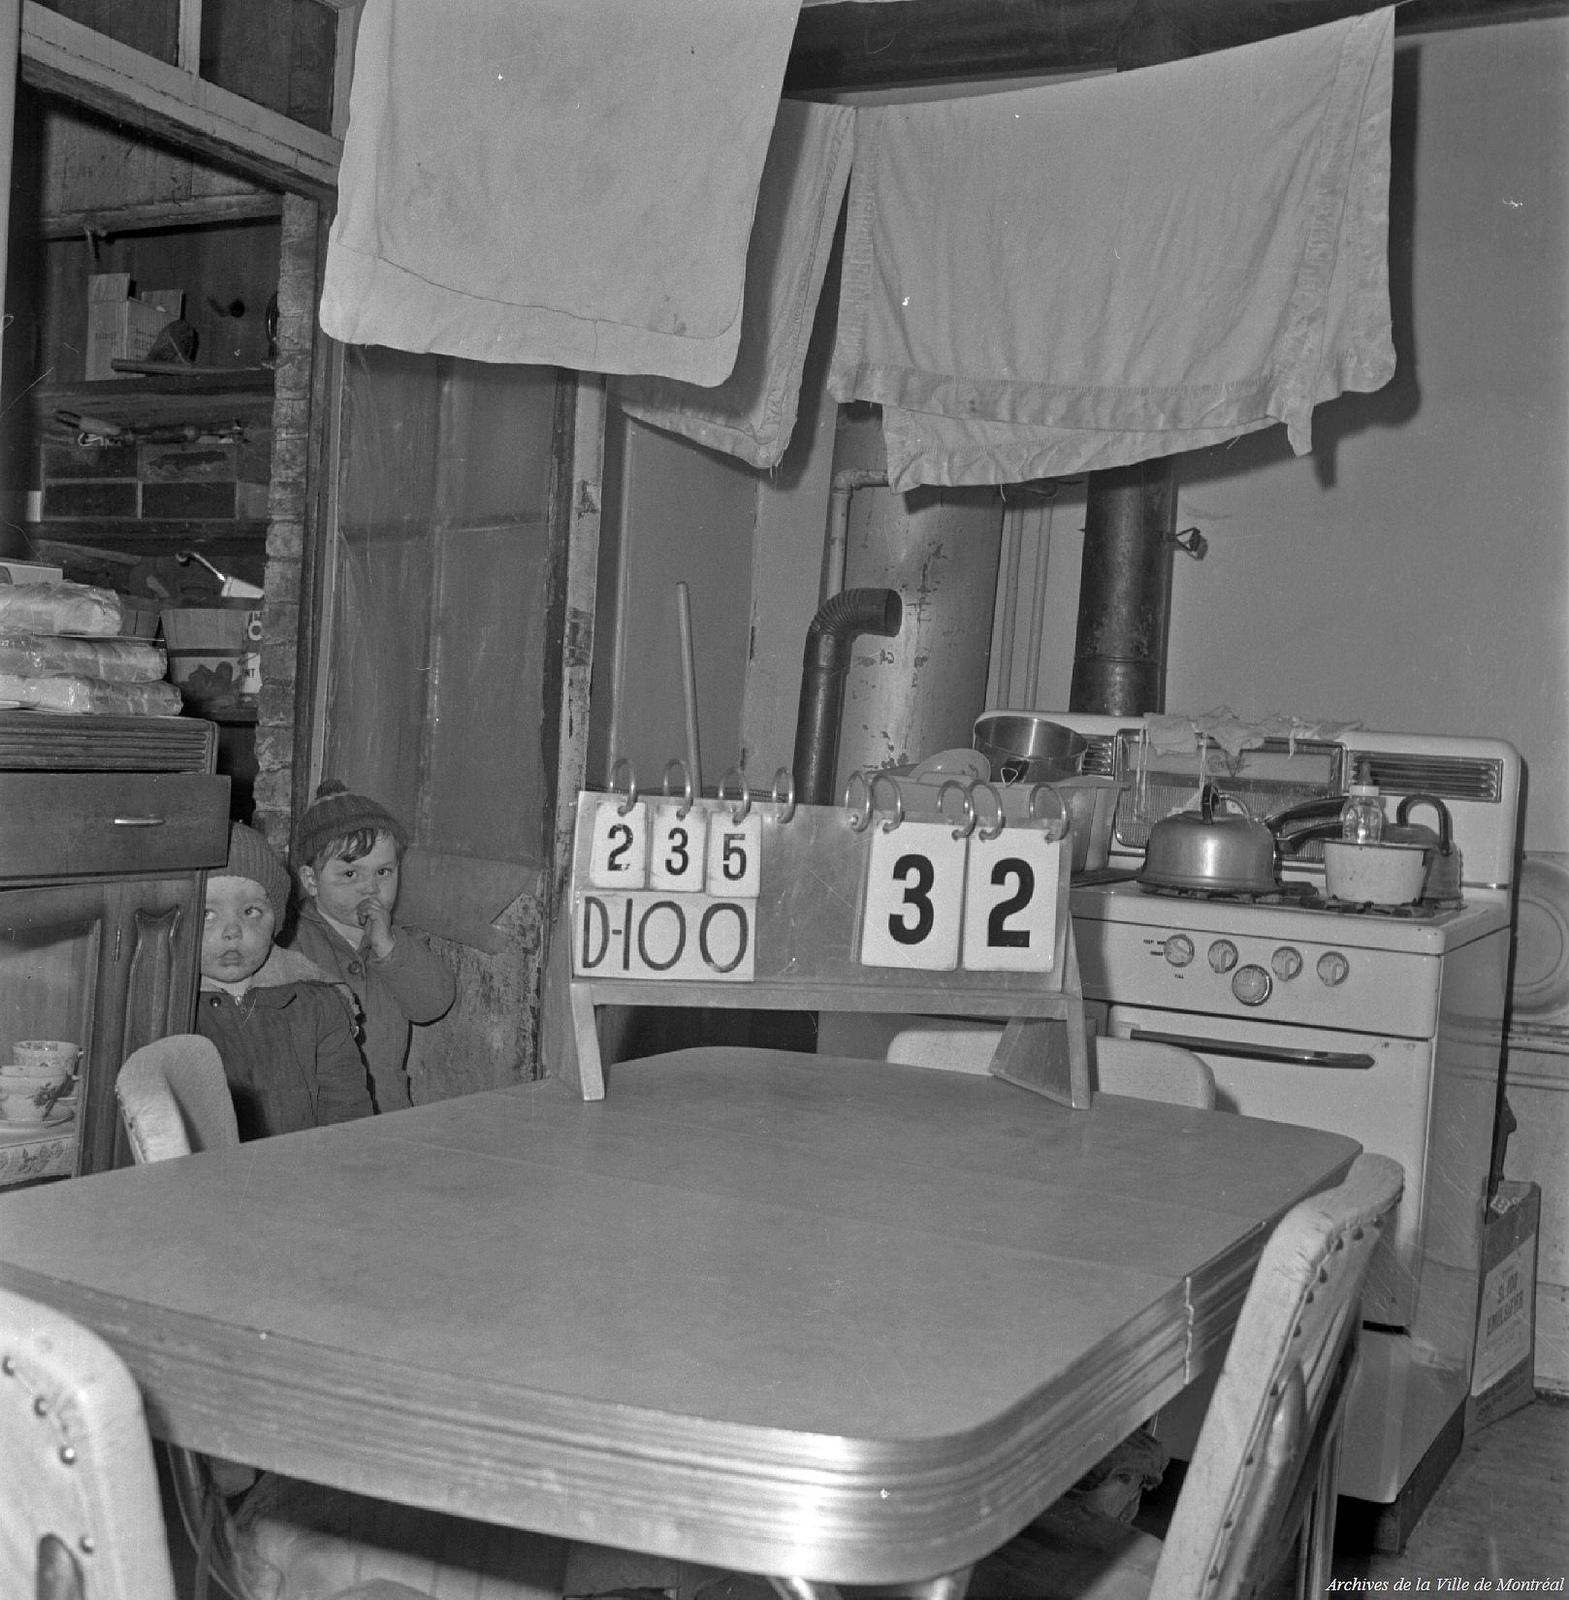 Two children stand in a kitchen with blankets hanging on laundry lines.